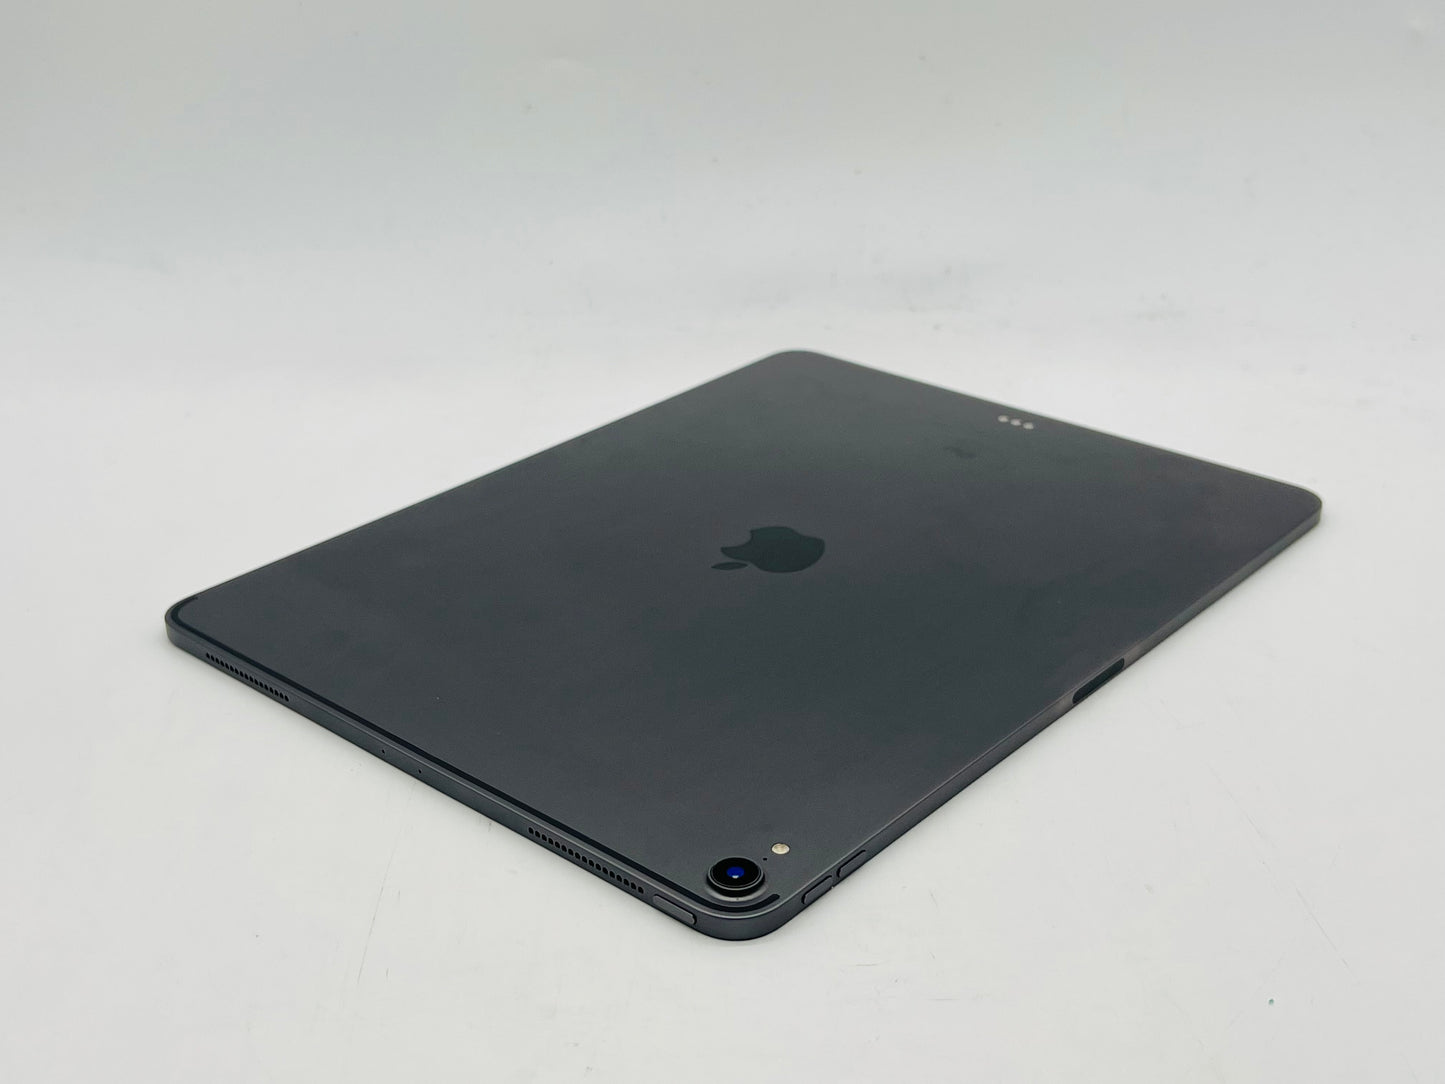 Apple 2018 iPad Pro (3rd generation) 12.9 in 256GB Wi-Fi Only